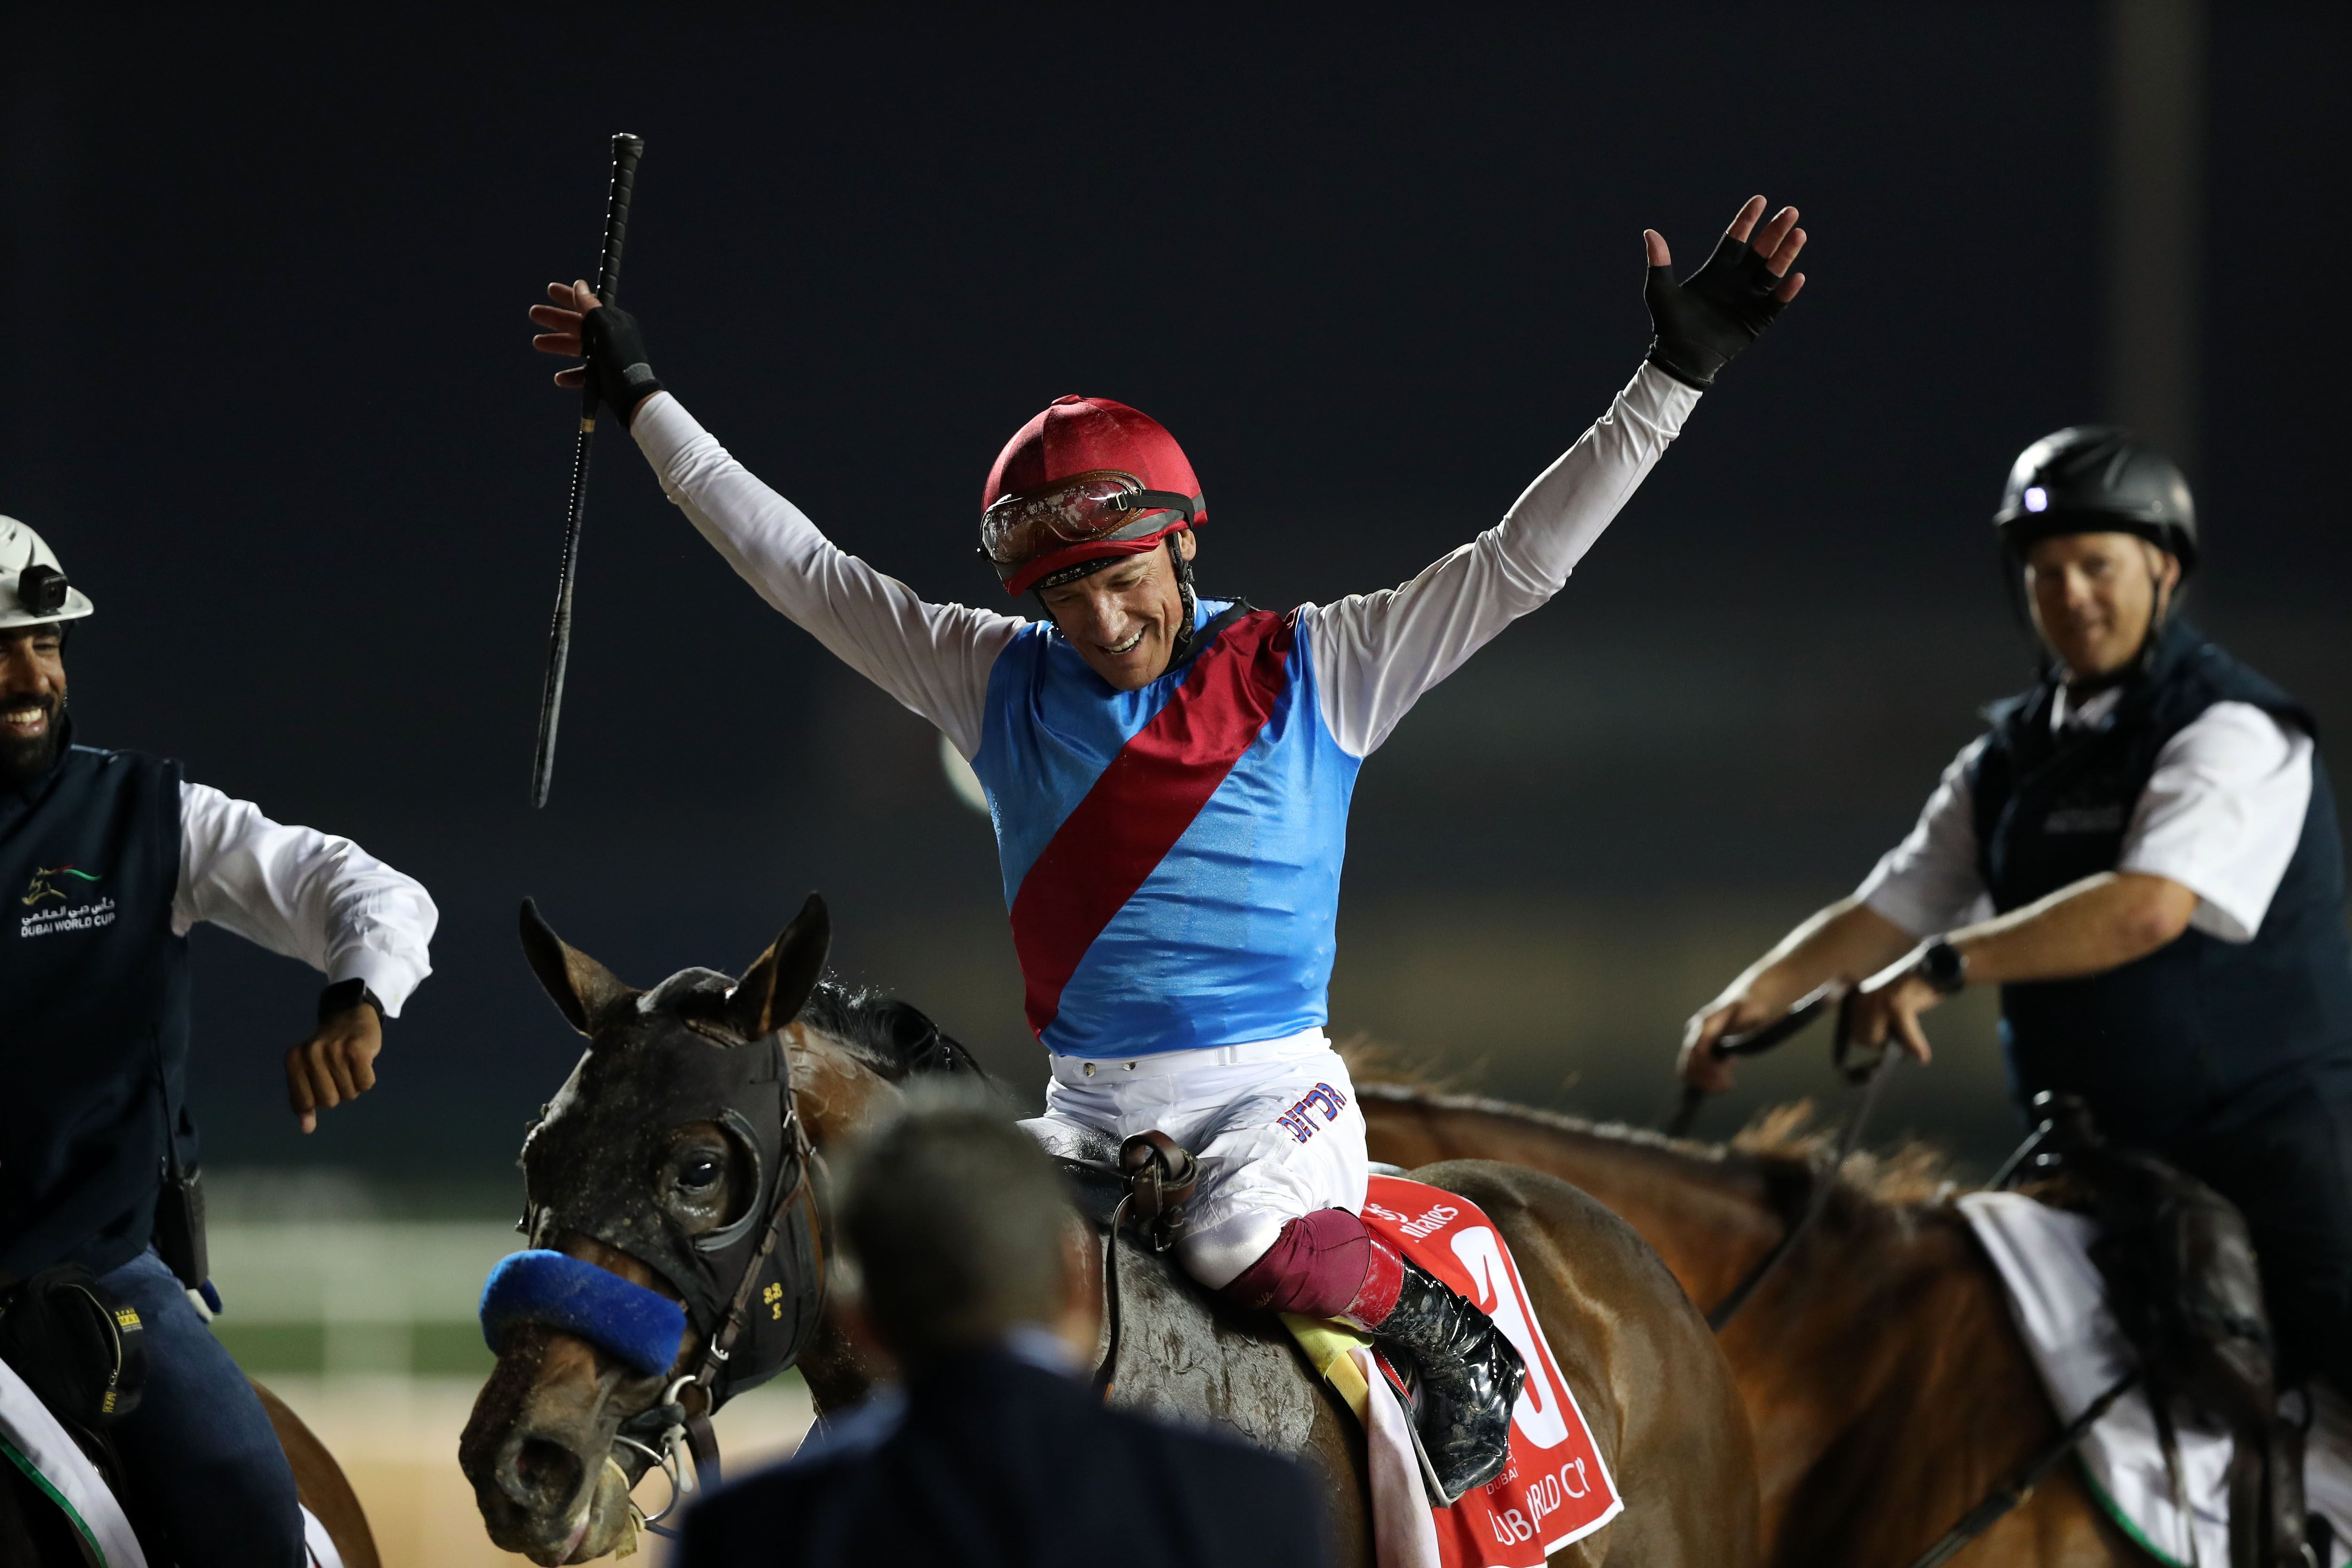 Race to Dubai prize money: $5m payout on offer in season finale